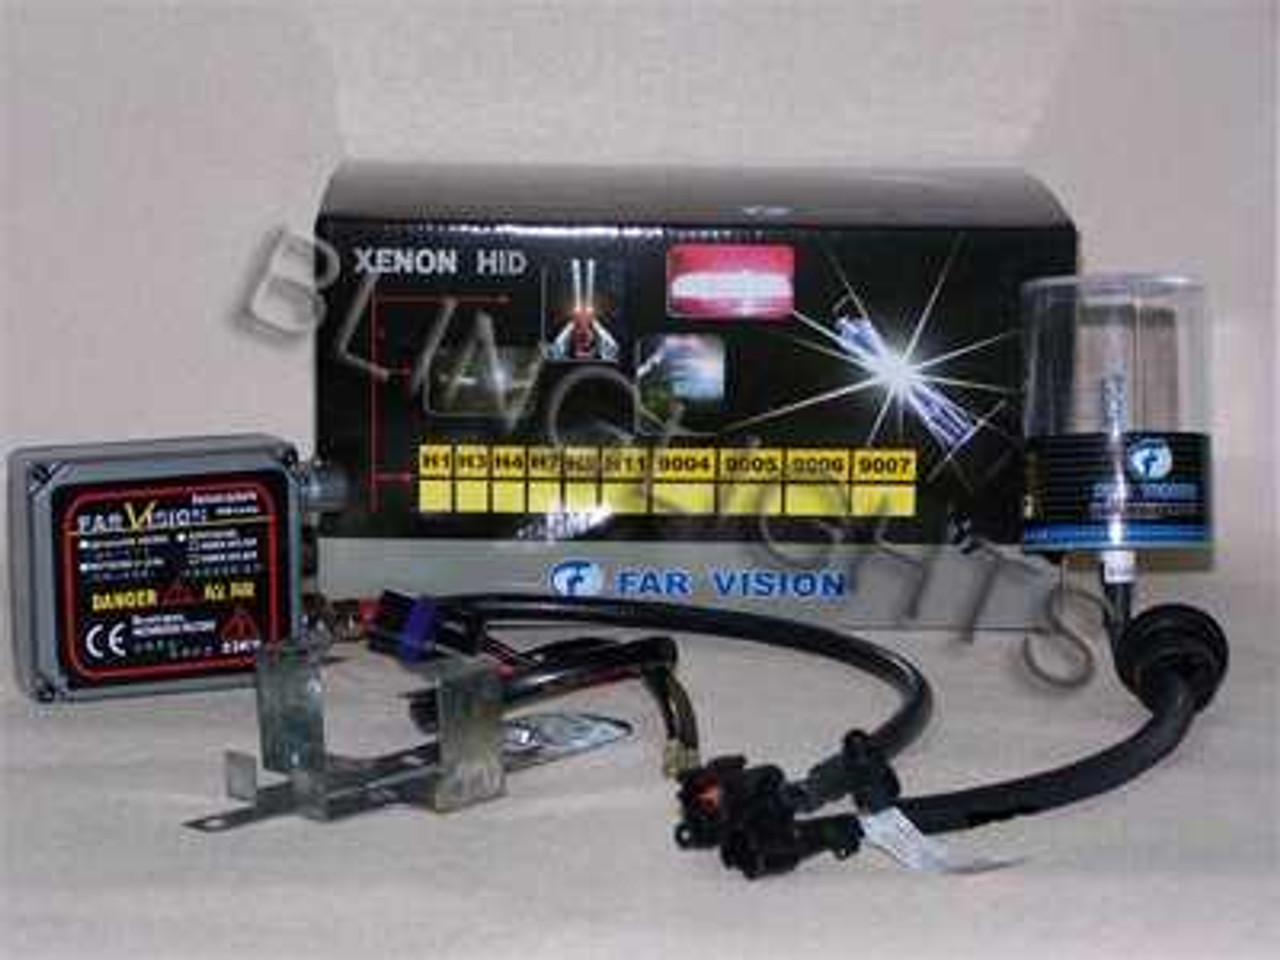 Toyota Yaris Xenon HID Conversion Kit for Foglamps Fog Lamps Driving Lights HIDs